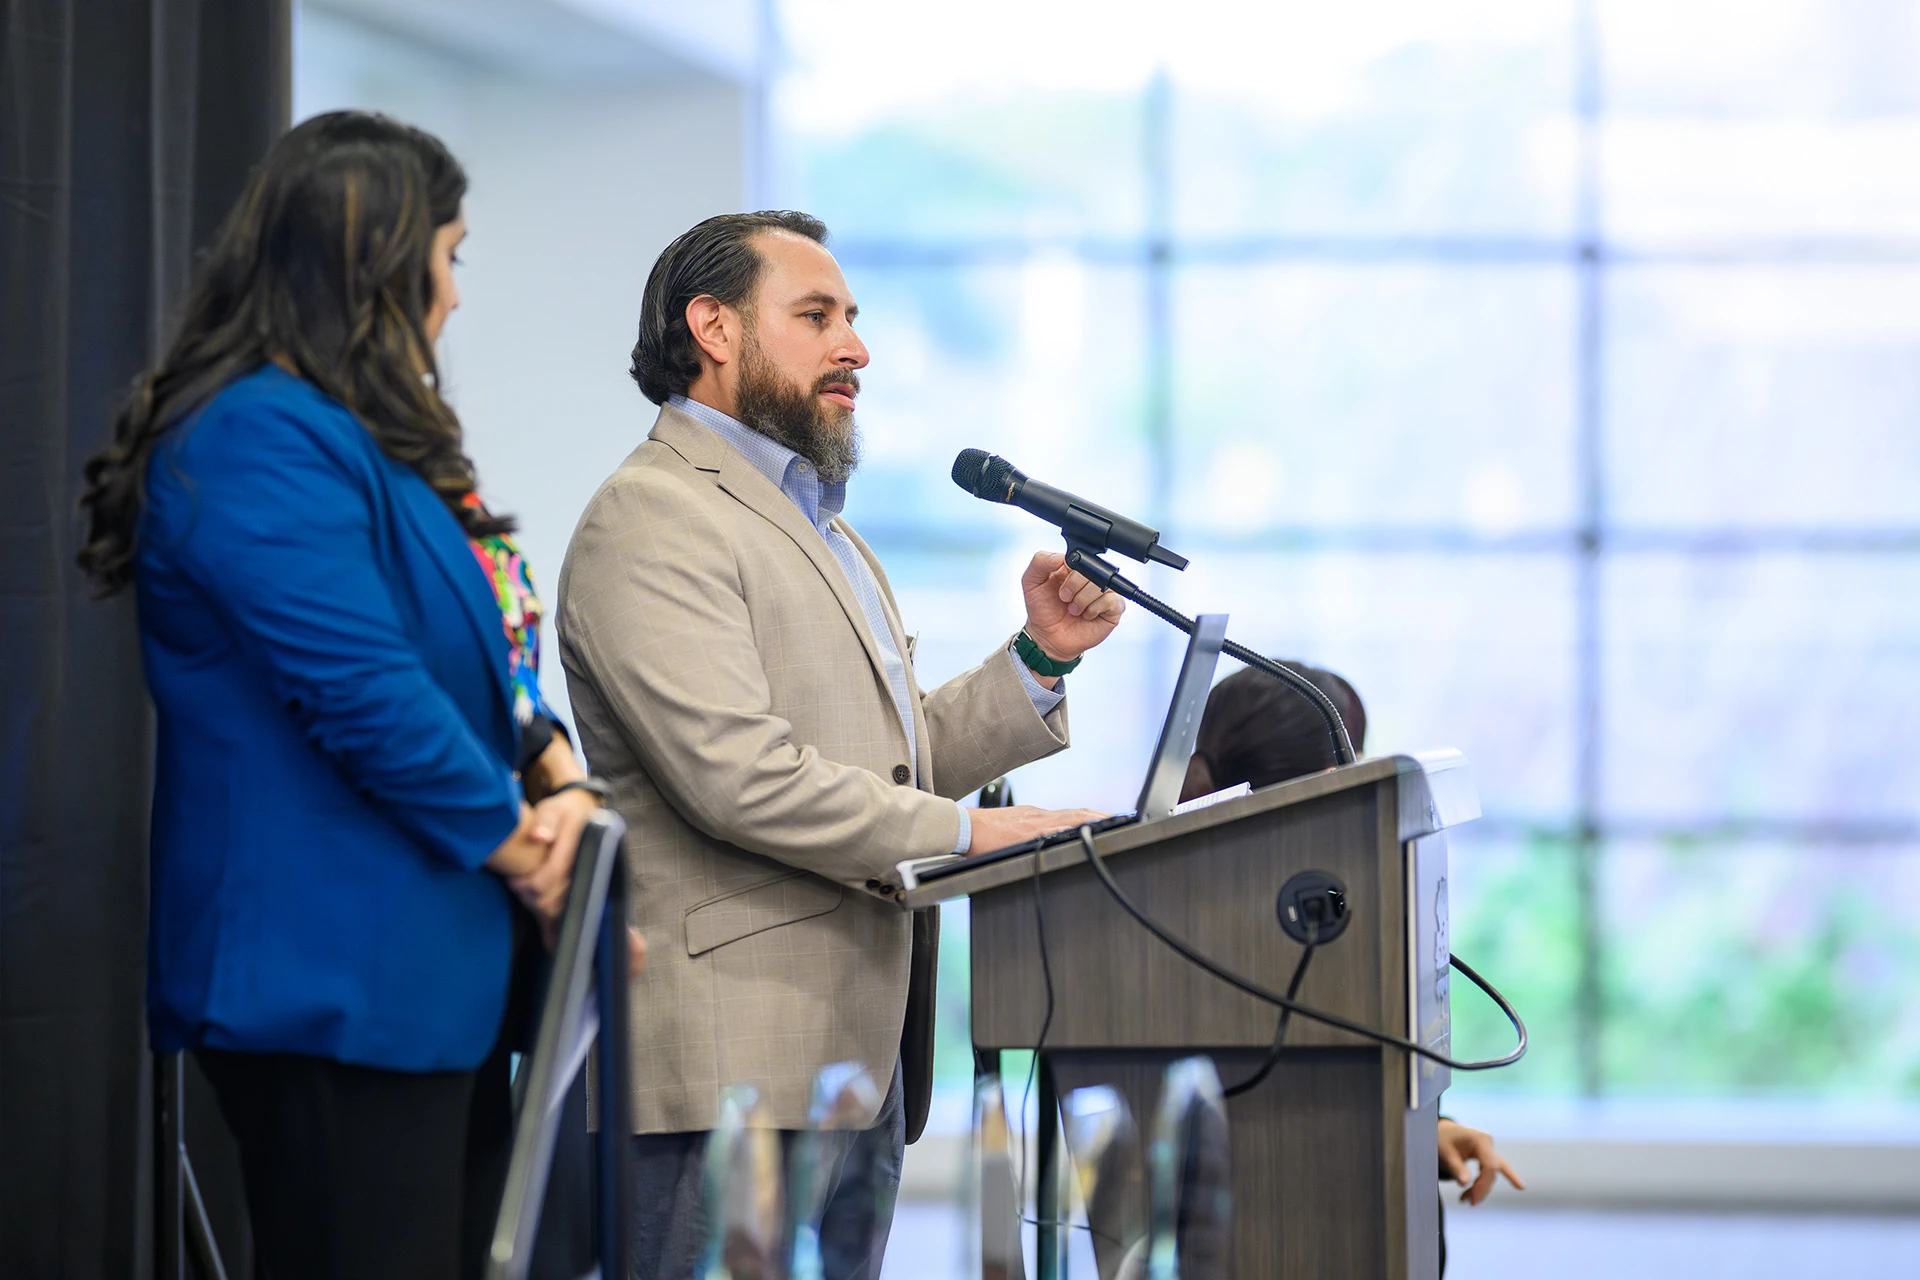 Elias Lopez speaking at the lectern with co-chair Amanda Flores looking on